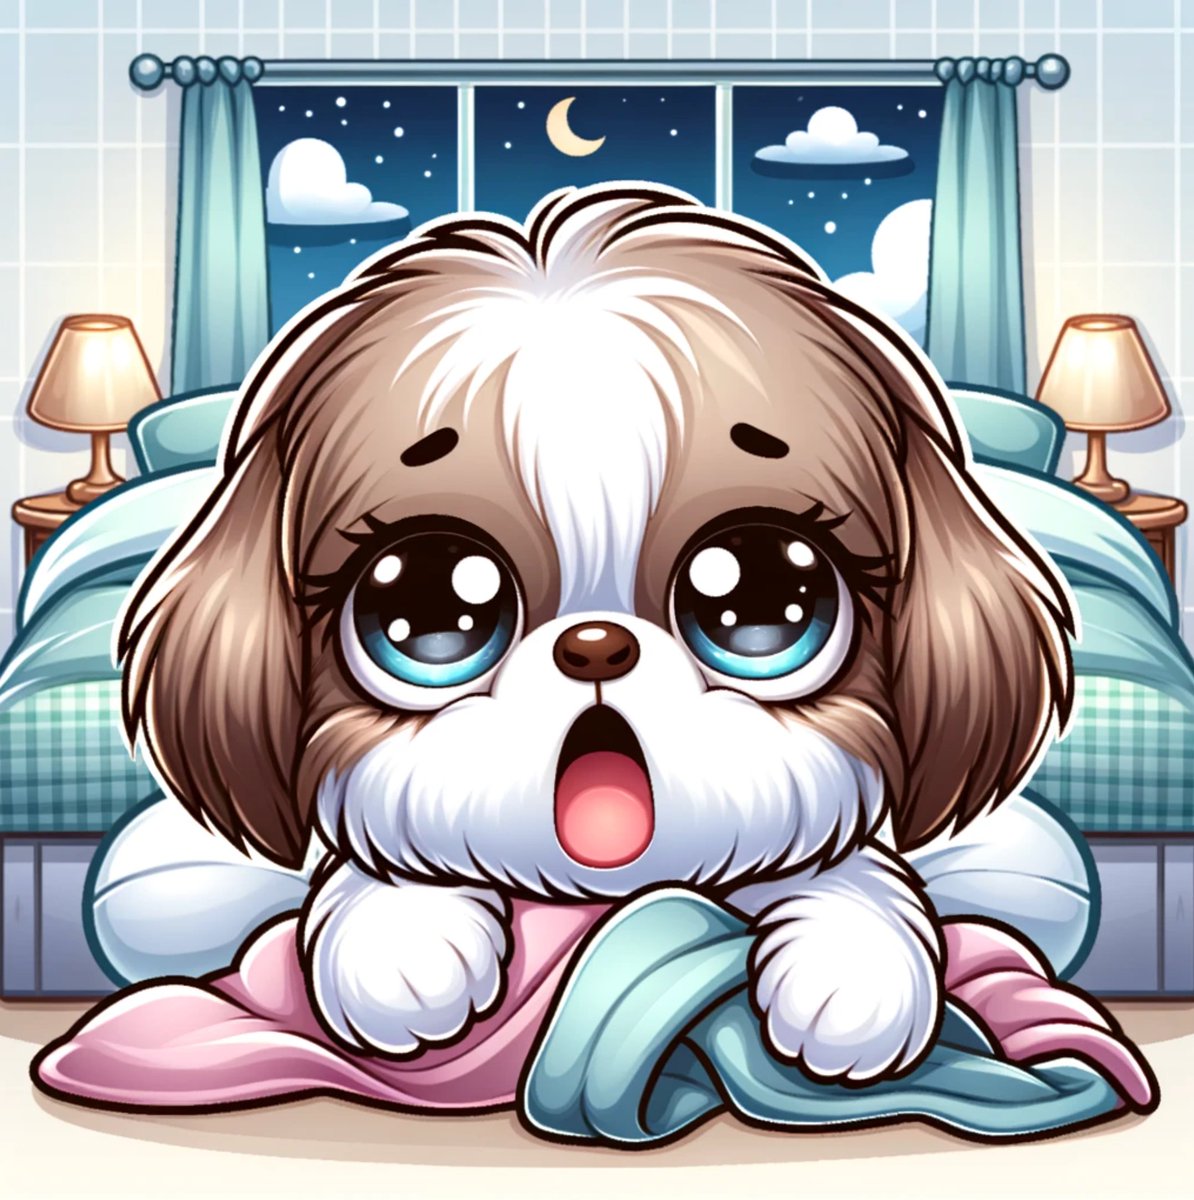 The caretaker of the Shitzulandia kennel is very tired and is calling it a night. 🐶💤 Take care of the place, Shih Tzu lovers and diamond-handed holders. See you all when the sun rises again! 🌞🐾 #BabyShitzu #GoodNight #ShihTzuLovers #DiamondHands @Babyshitzu